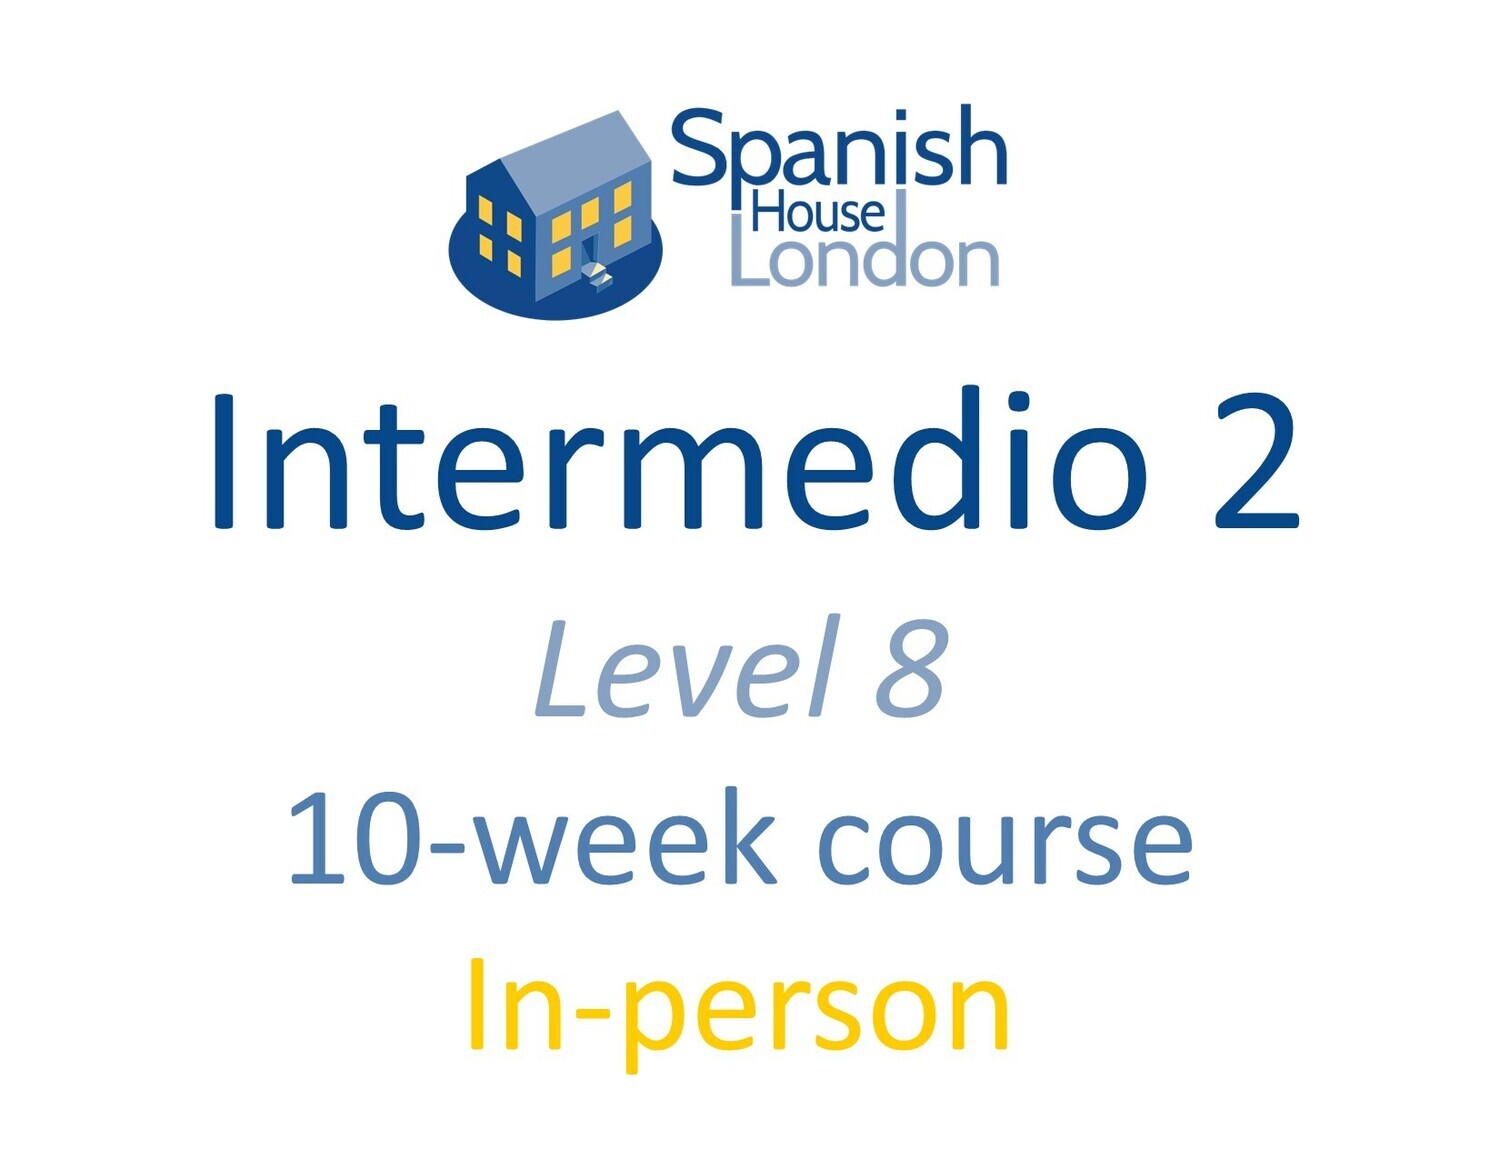 Intermedio 2 Course starting on 16th May at 6pm in Euston / King's Cross